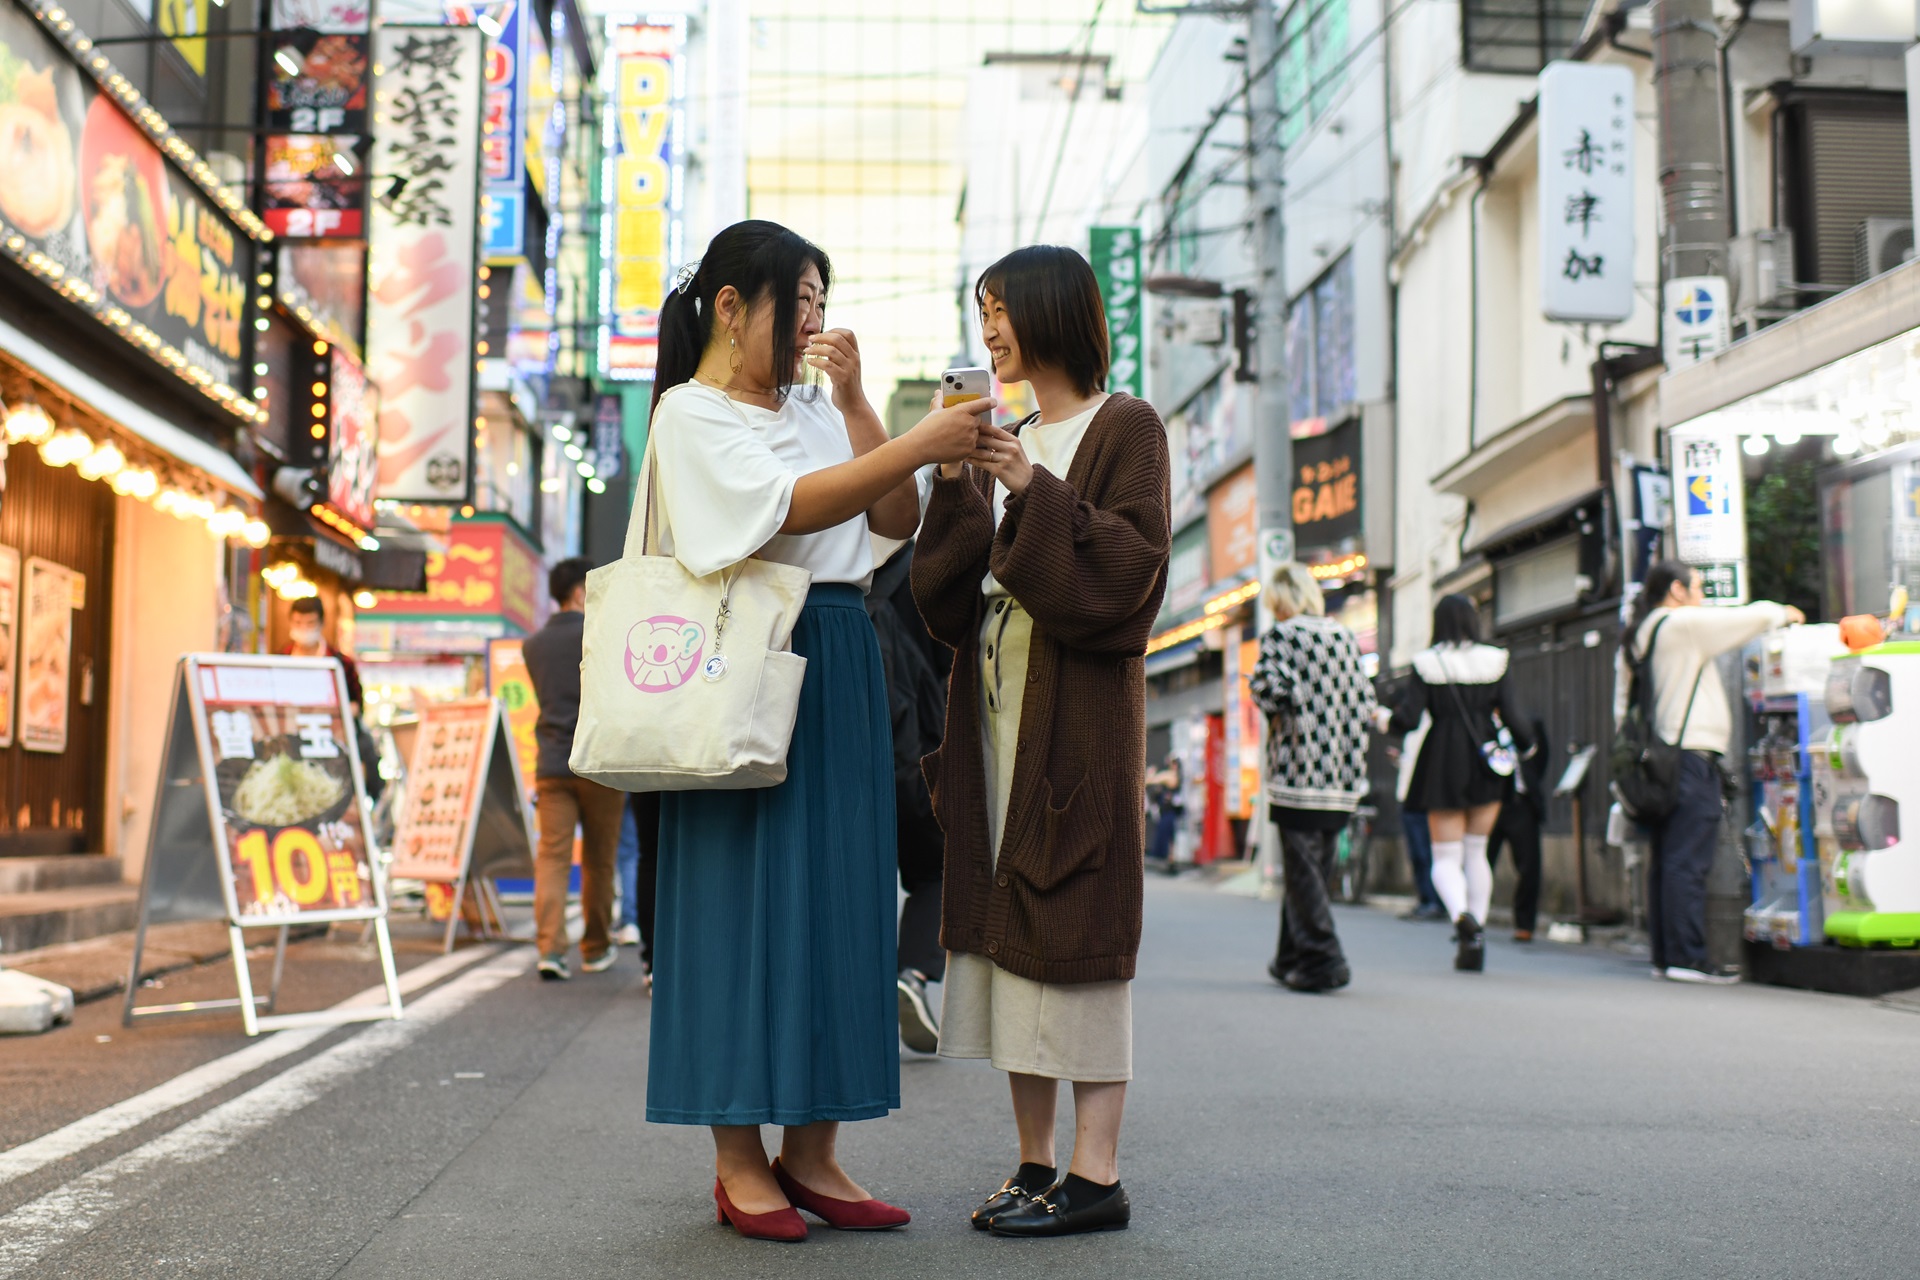 Photo of two women conversing while standing in a street in Tokyo, Japan